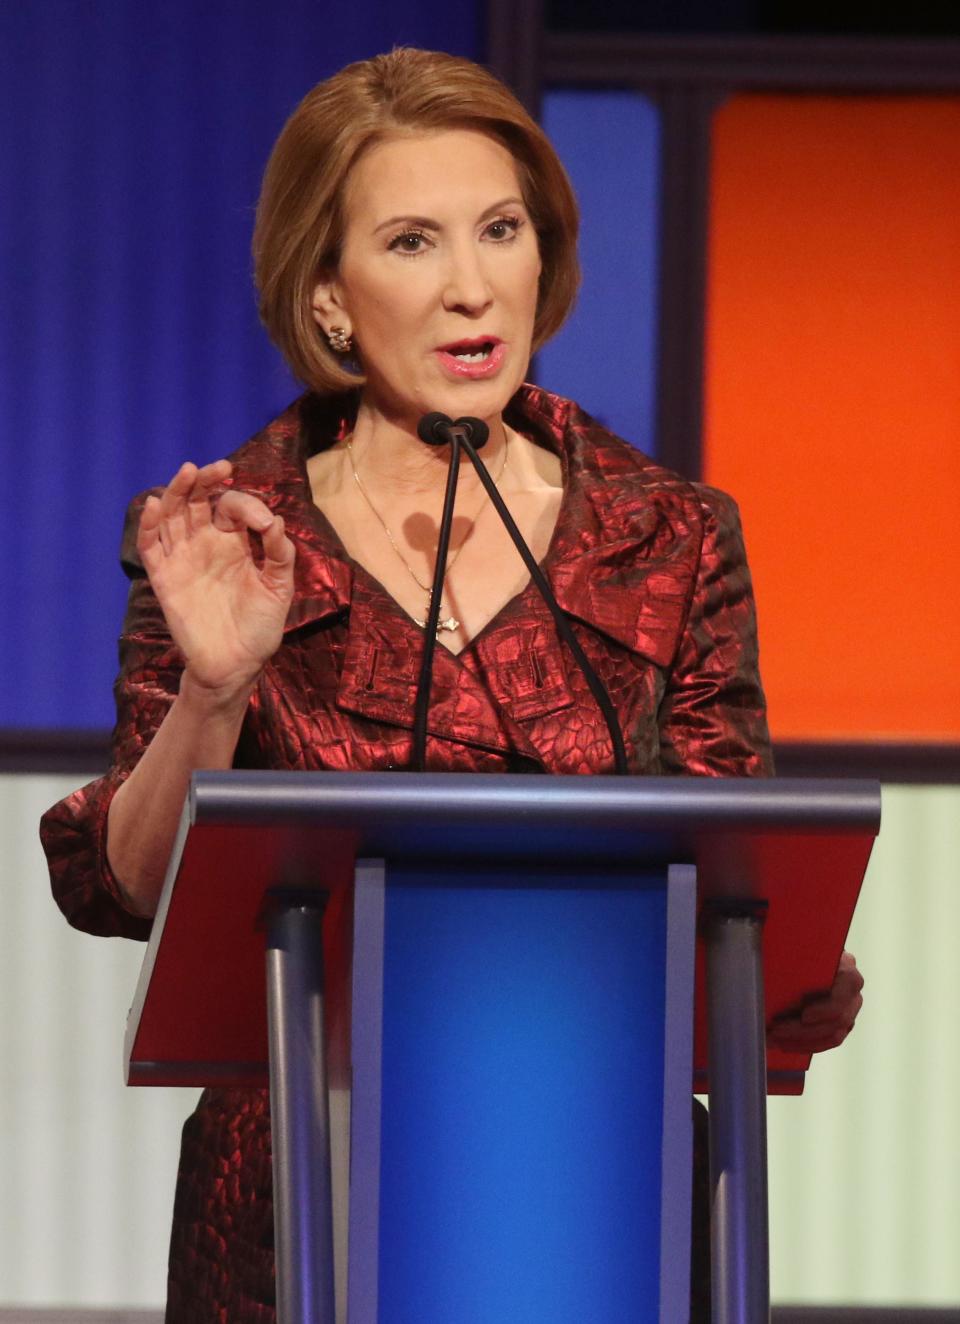 Republican presidential hopeful Carly Fiorina during the undercard Republican debate at the Iowa Events Center in Des Moines, Iowa, Jan. 28, 2019.